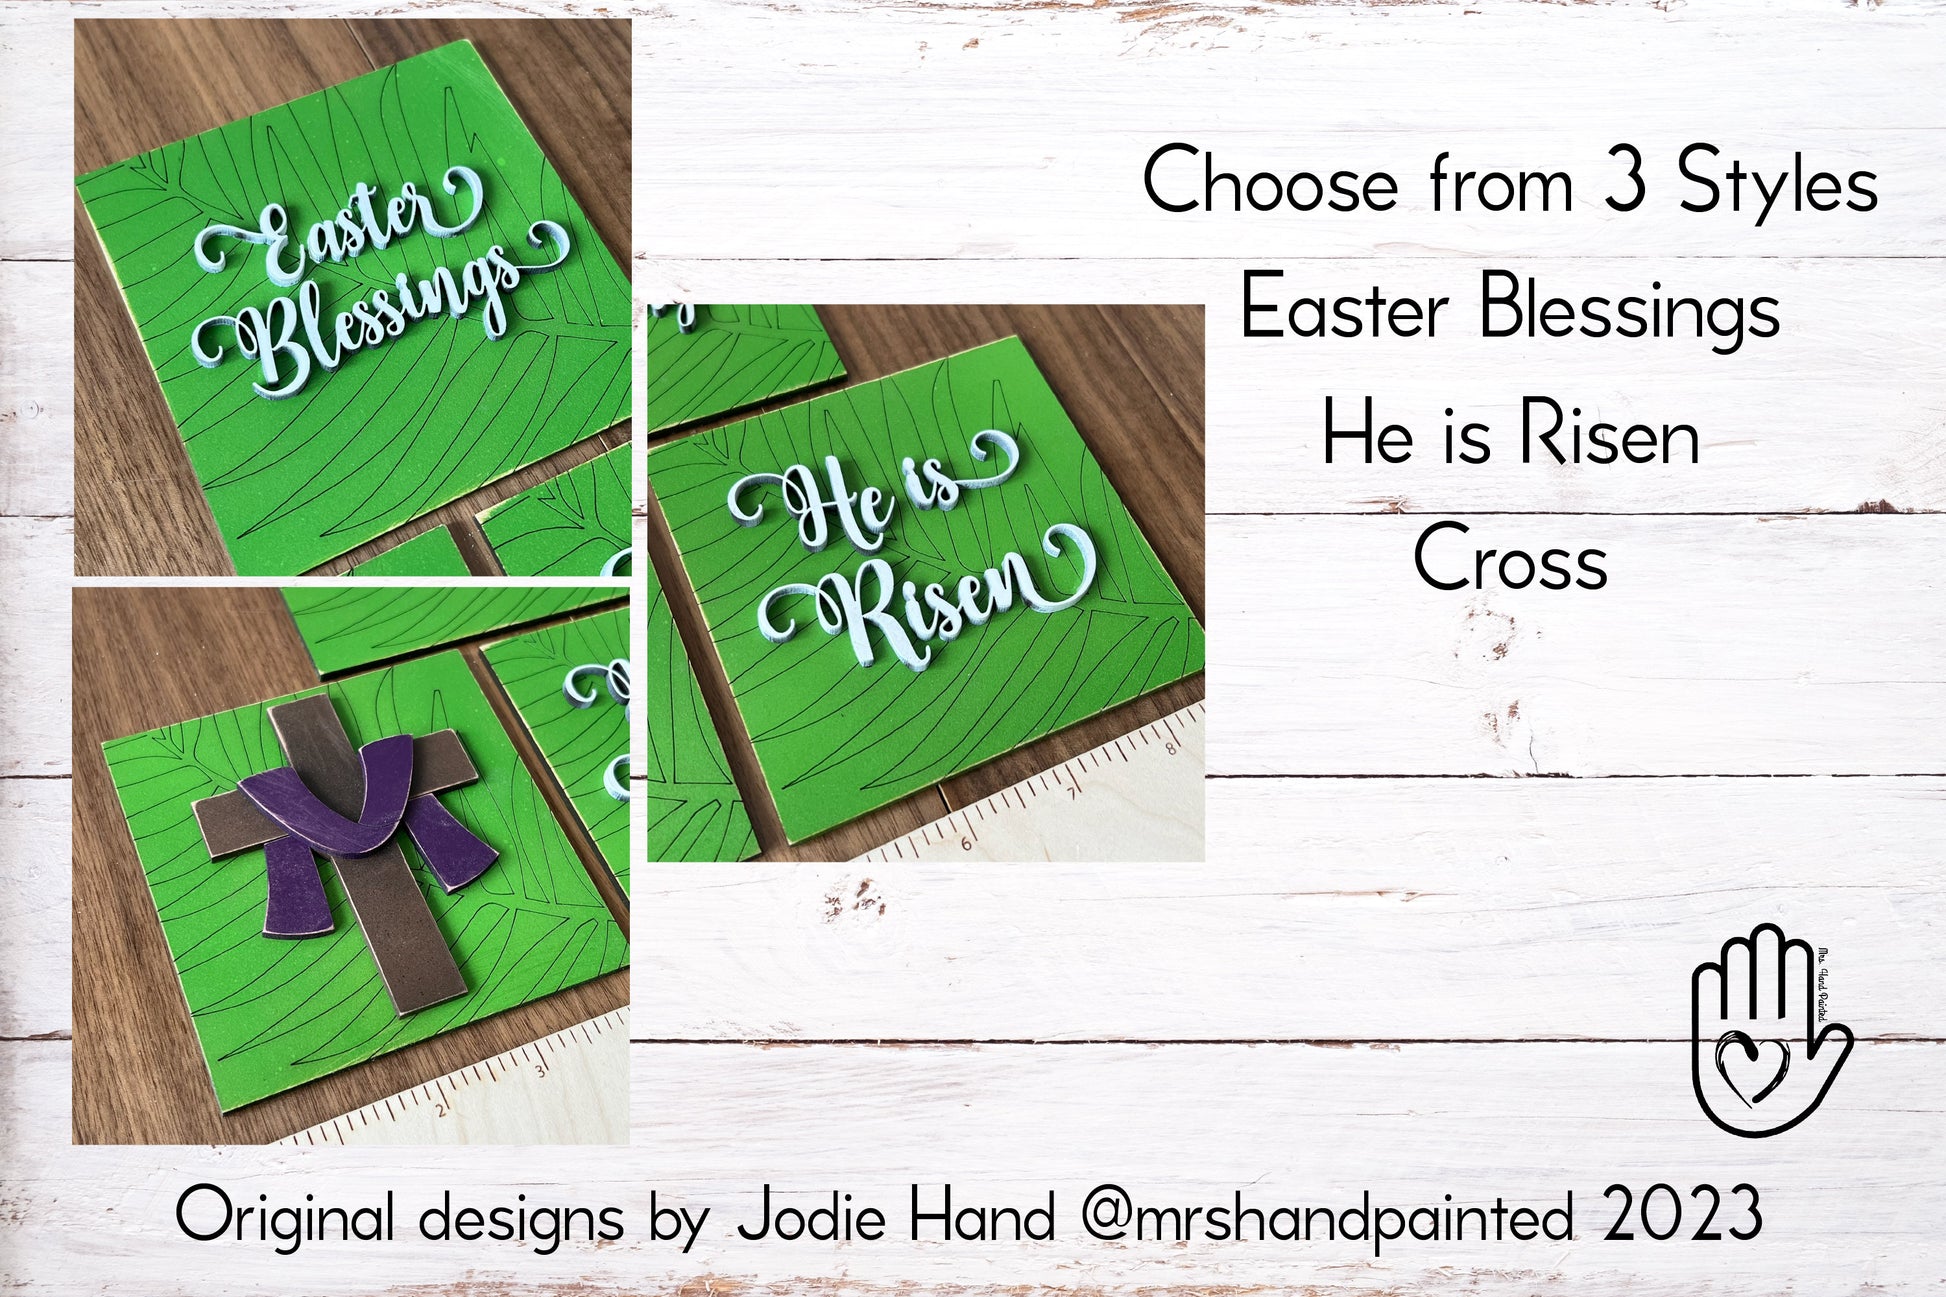 Easter Blessings Interchangeable Signs - Laser Cut Wood Painted